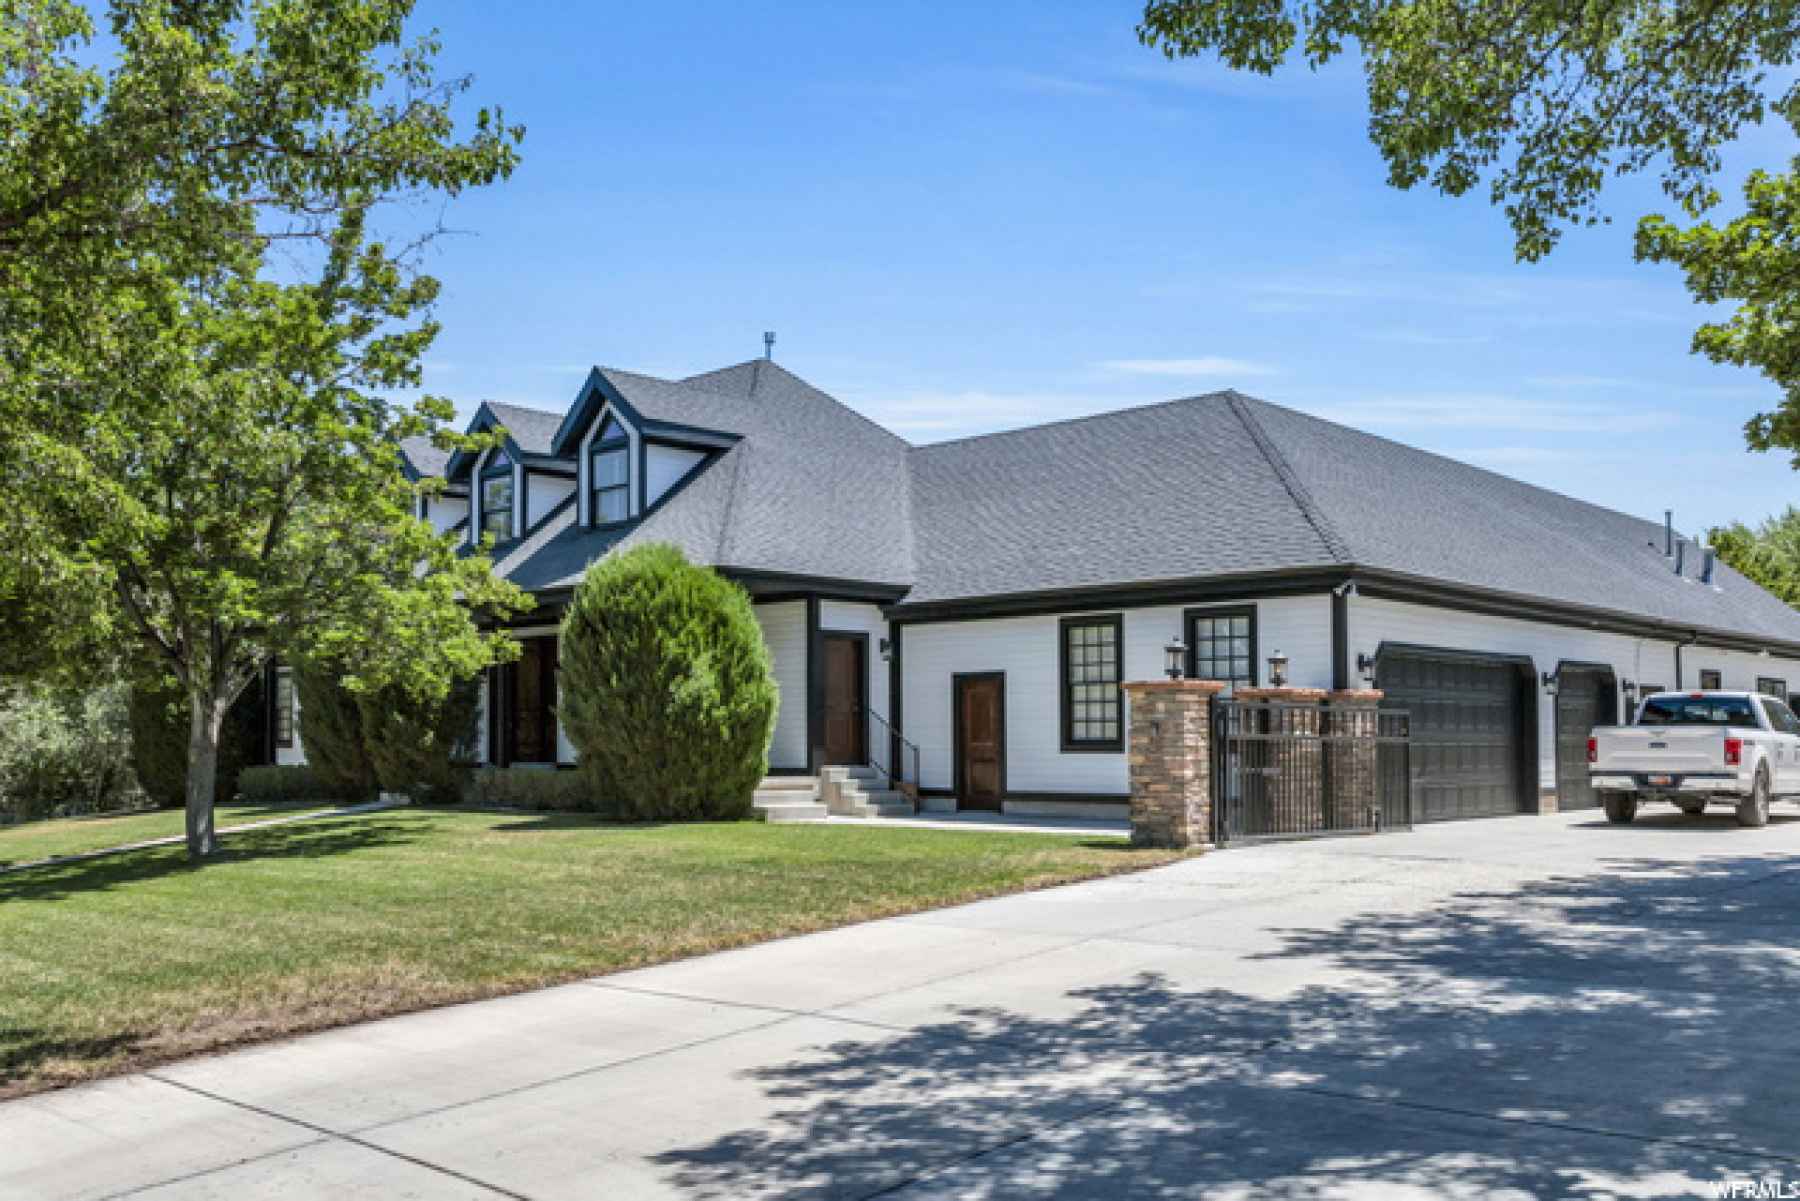 Gated drive with all the parking you will ever need! Huge oversized garage, plus 100X60 quonset!